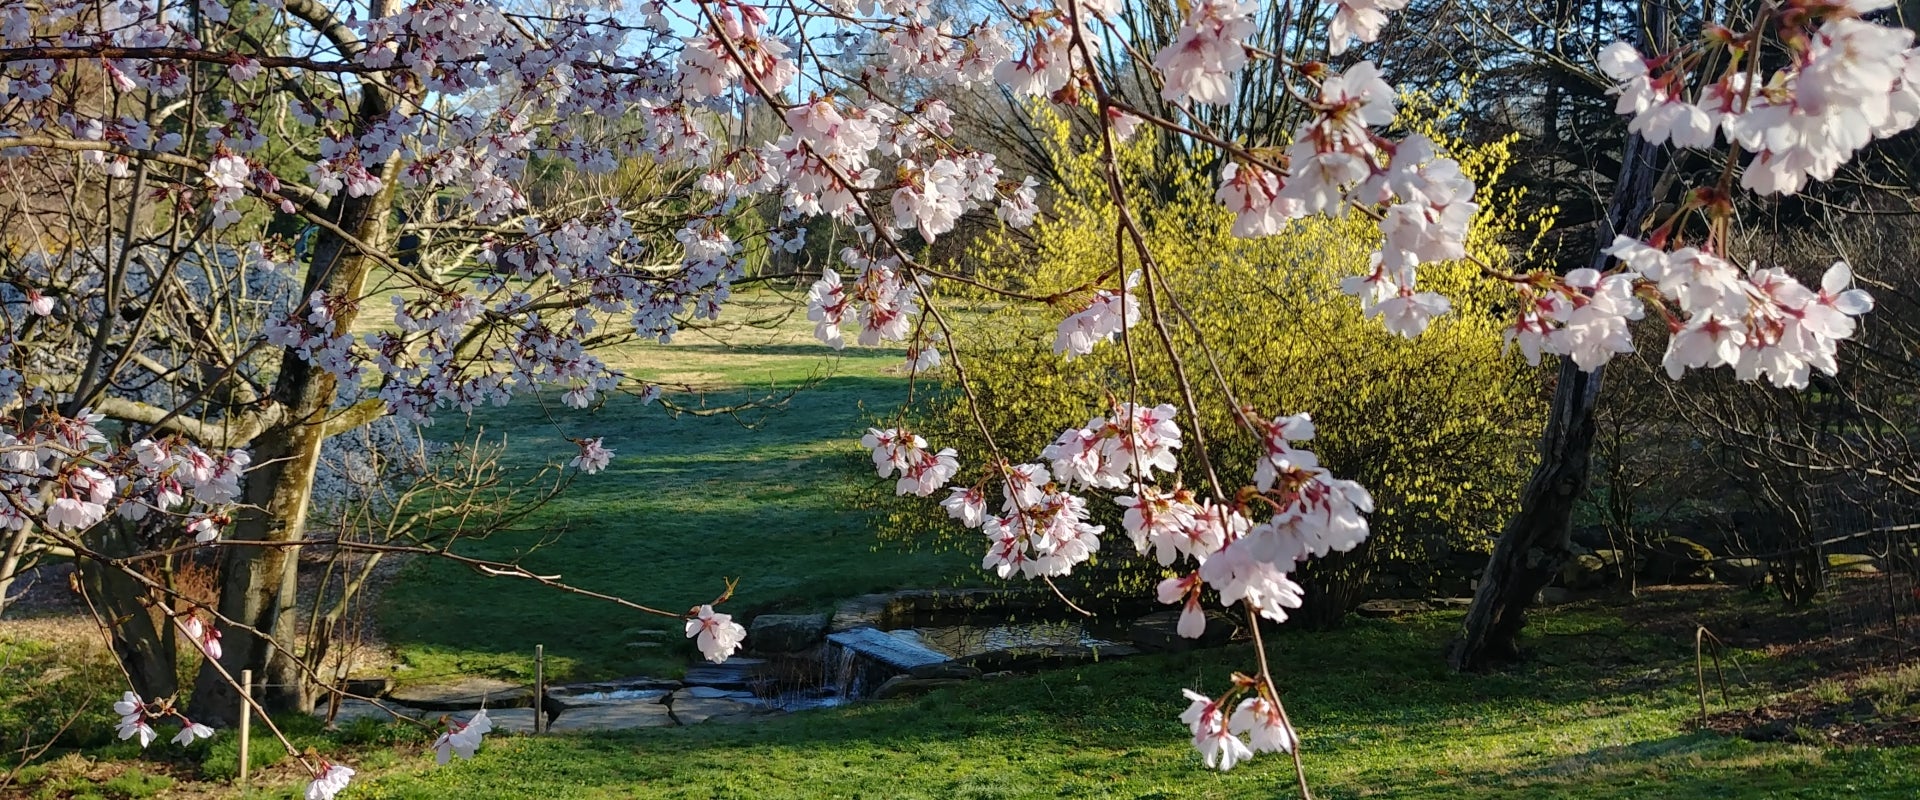 A cherry blossom tree in bloom in a green outdoor area.